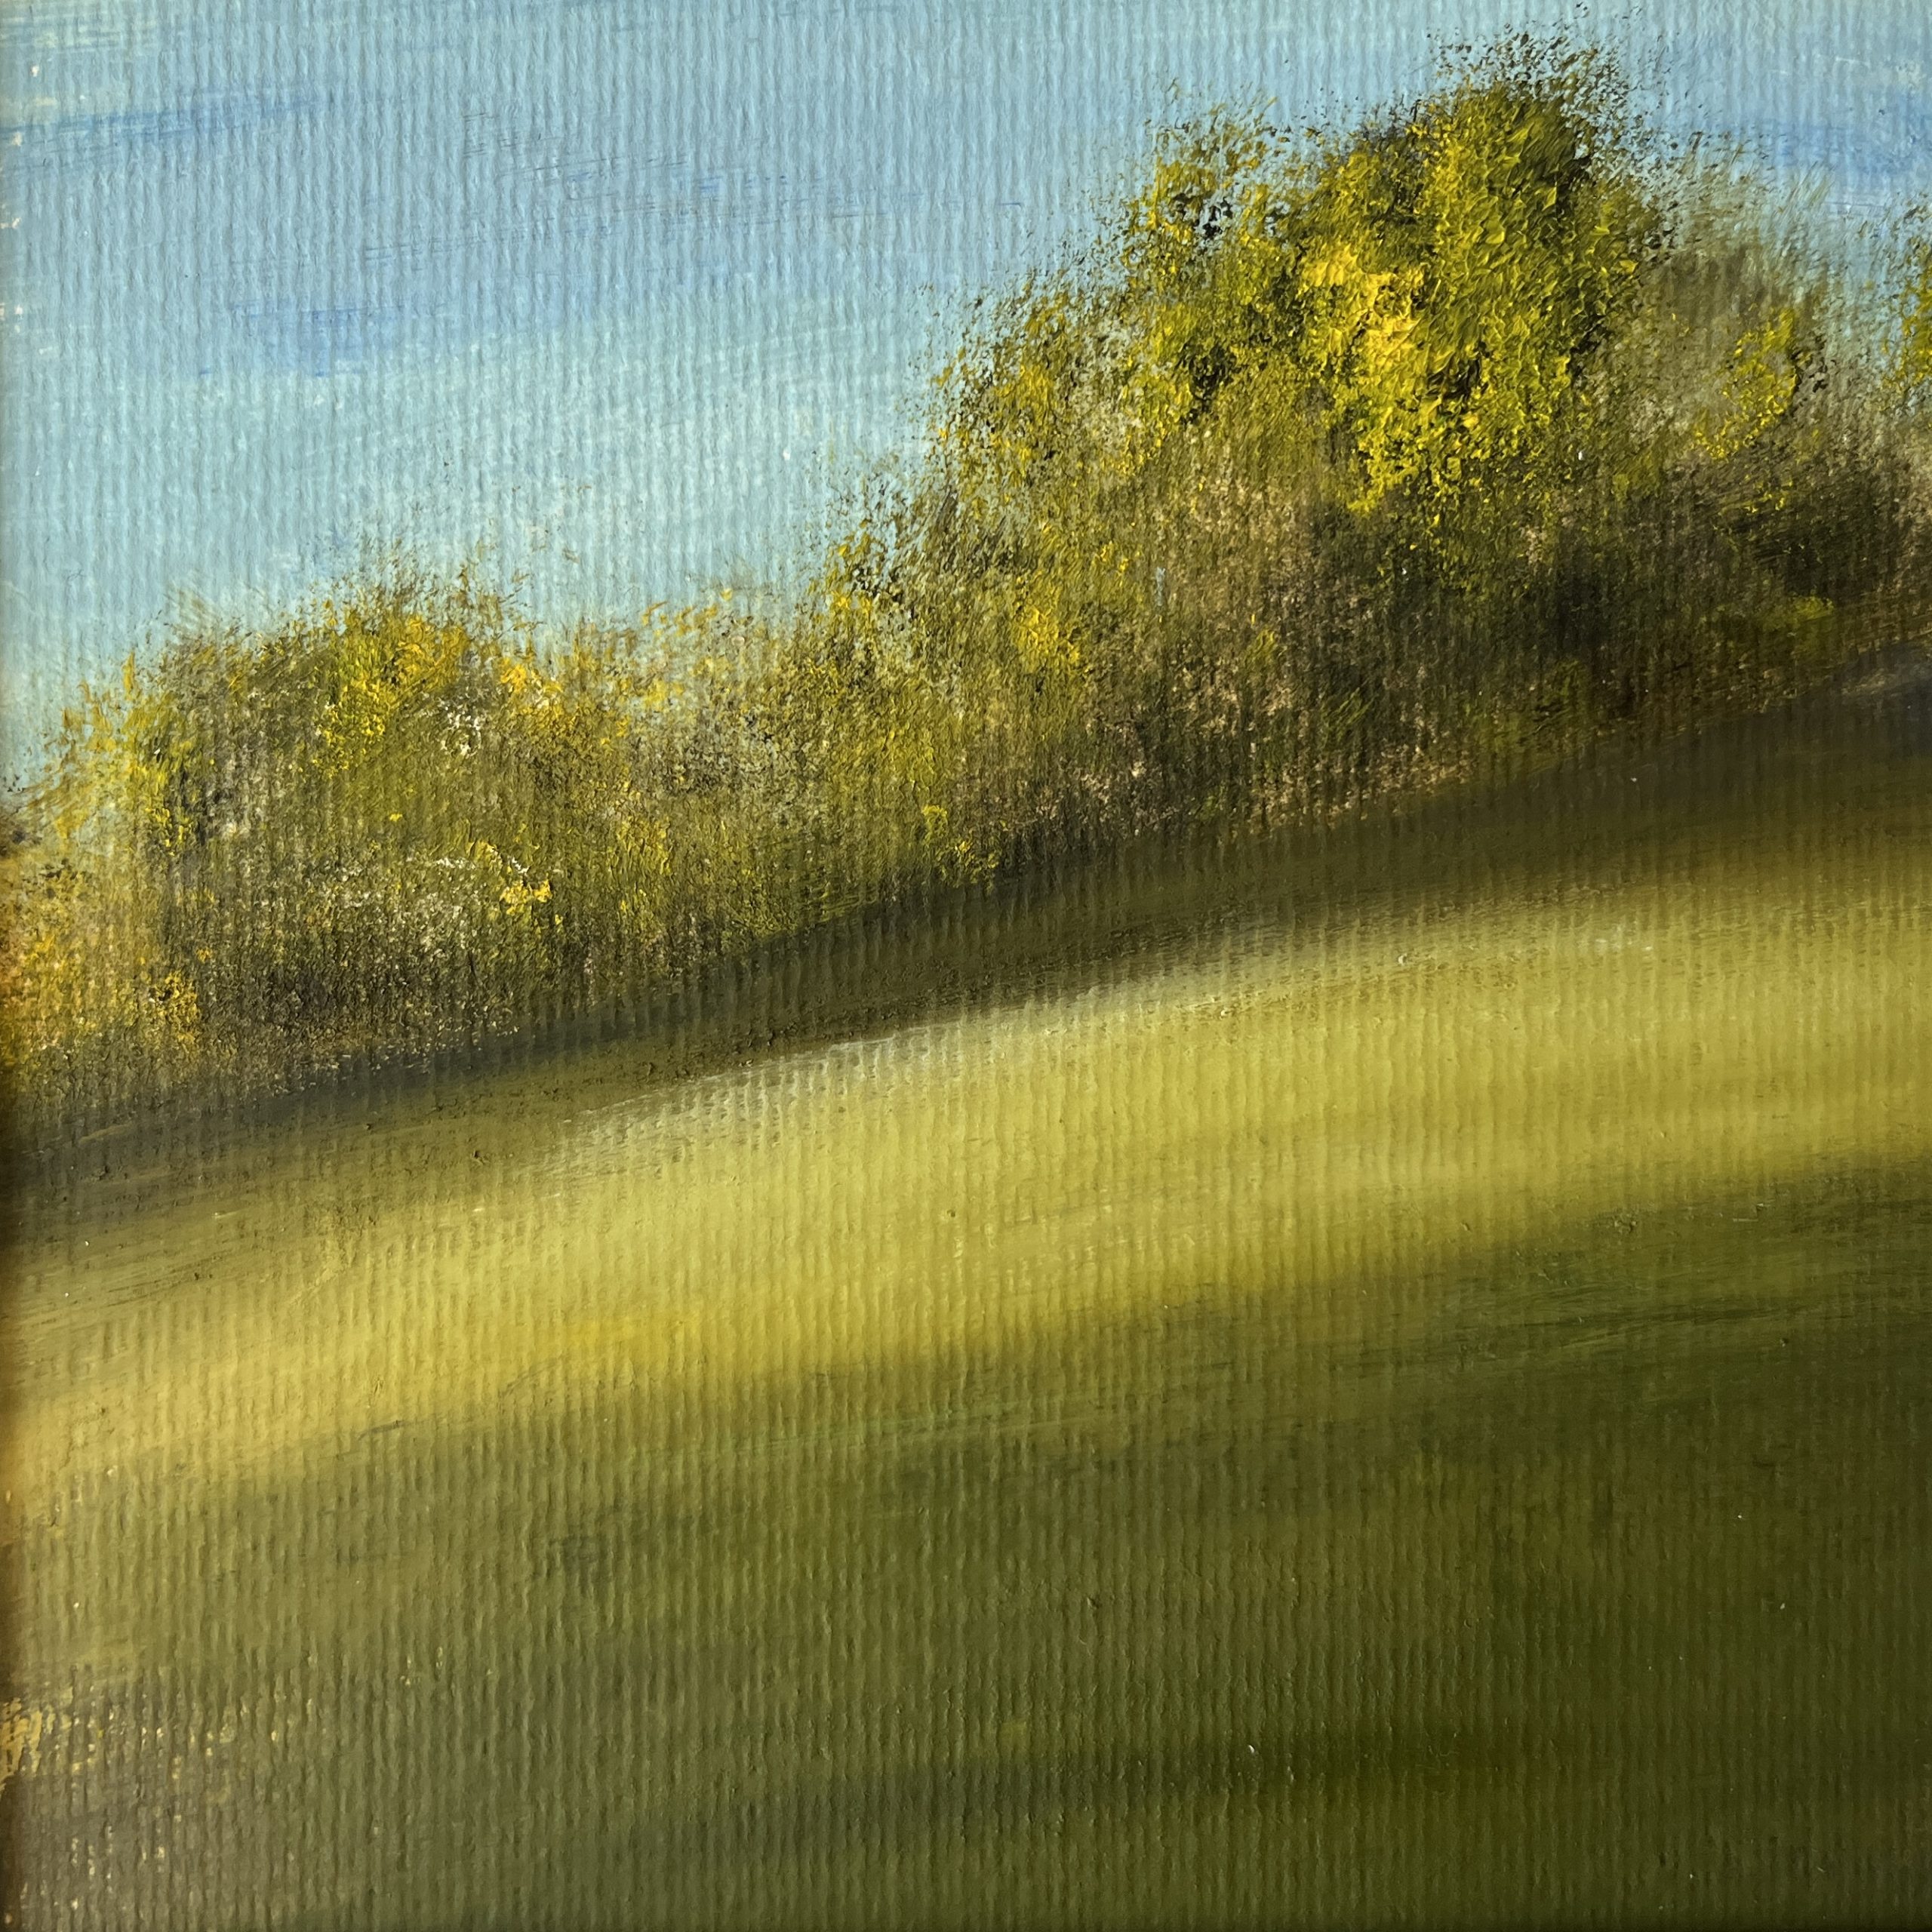 oil painting of summer meadow with grass and tree